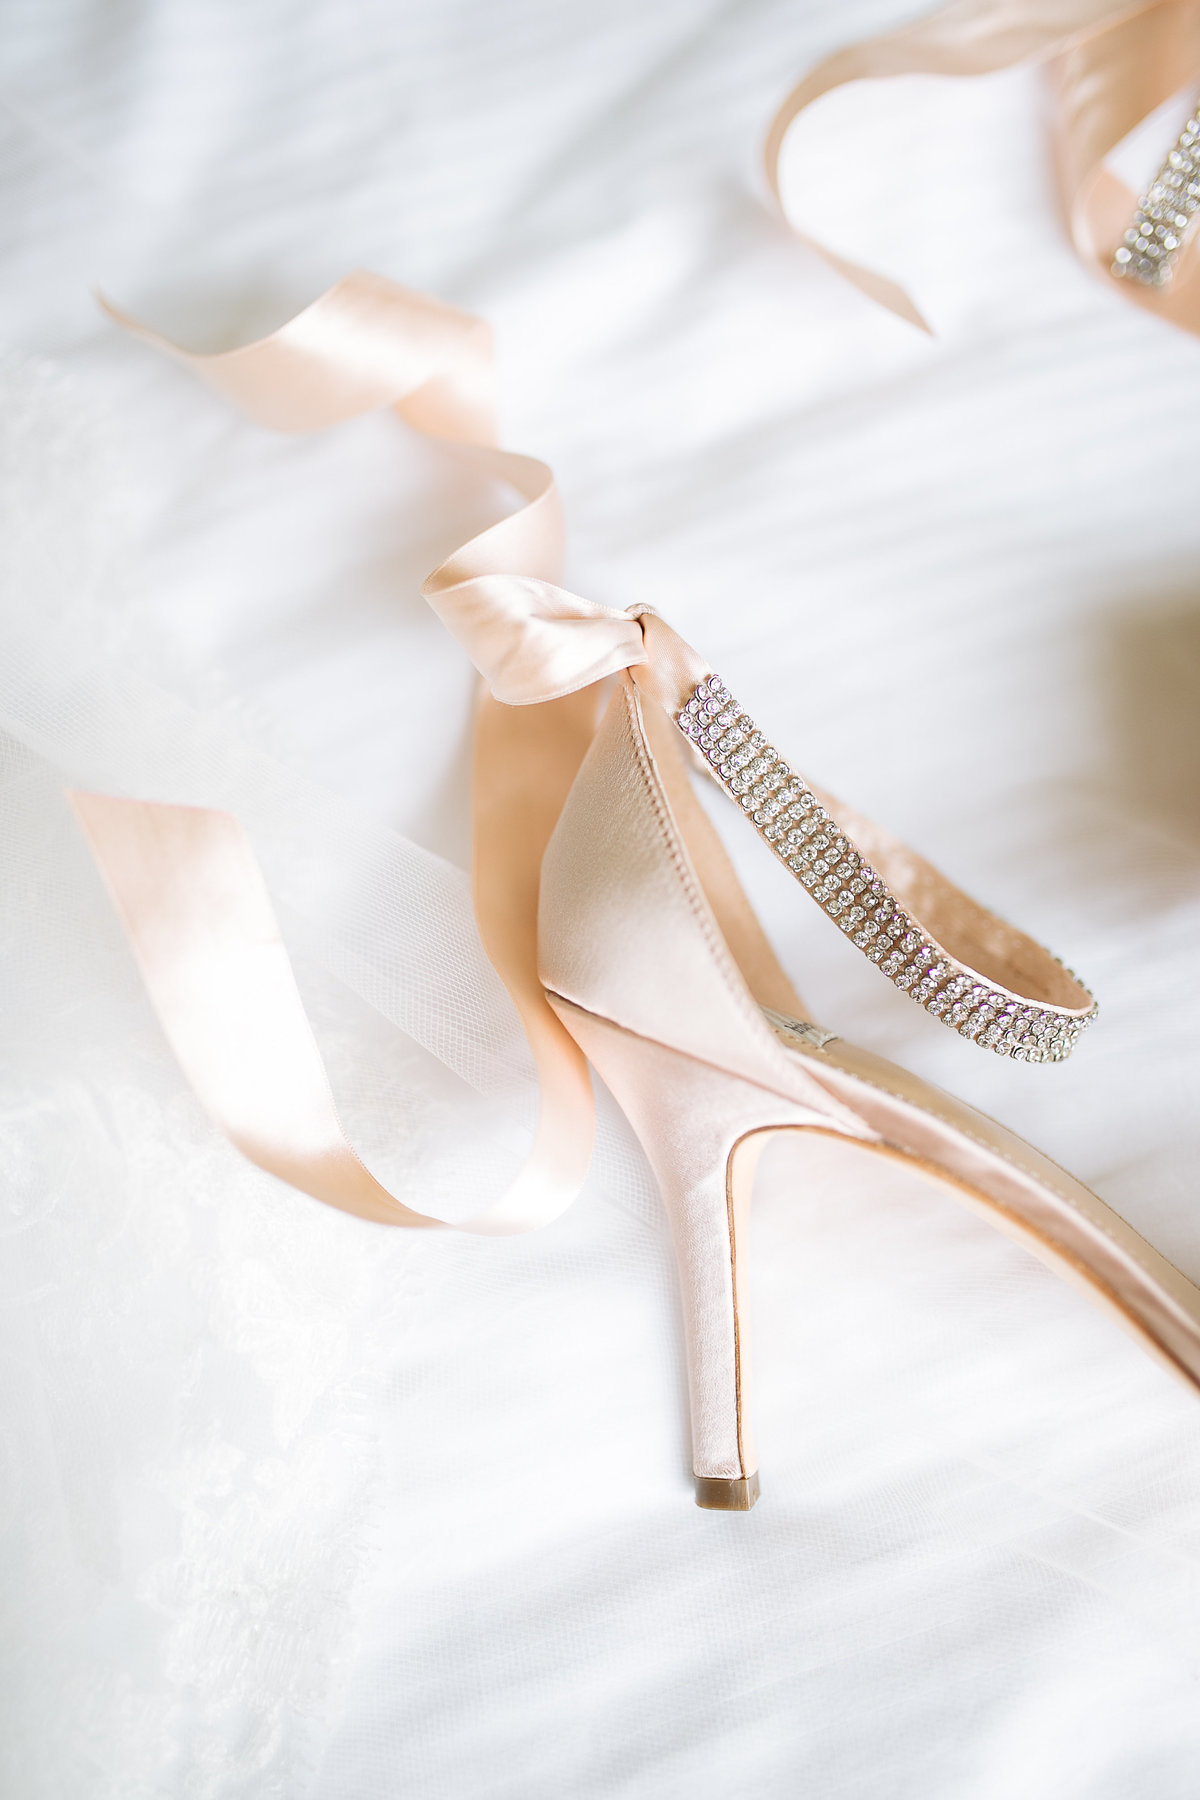 bridal shoes from bhldn worn at a houston wedding